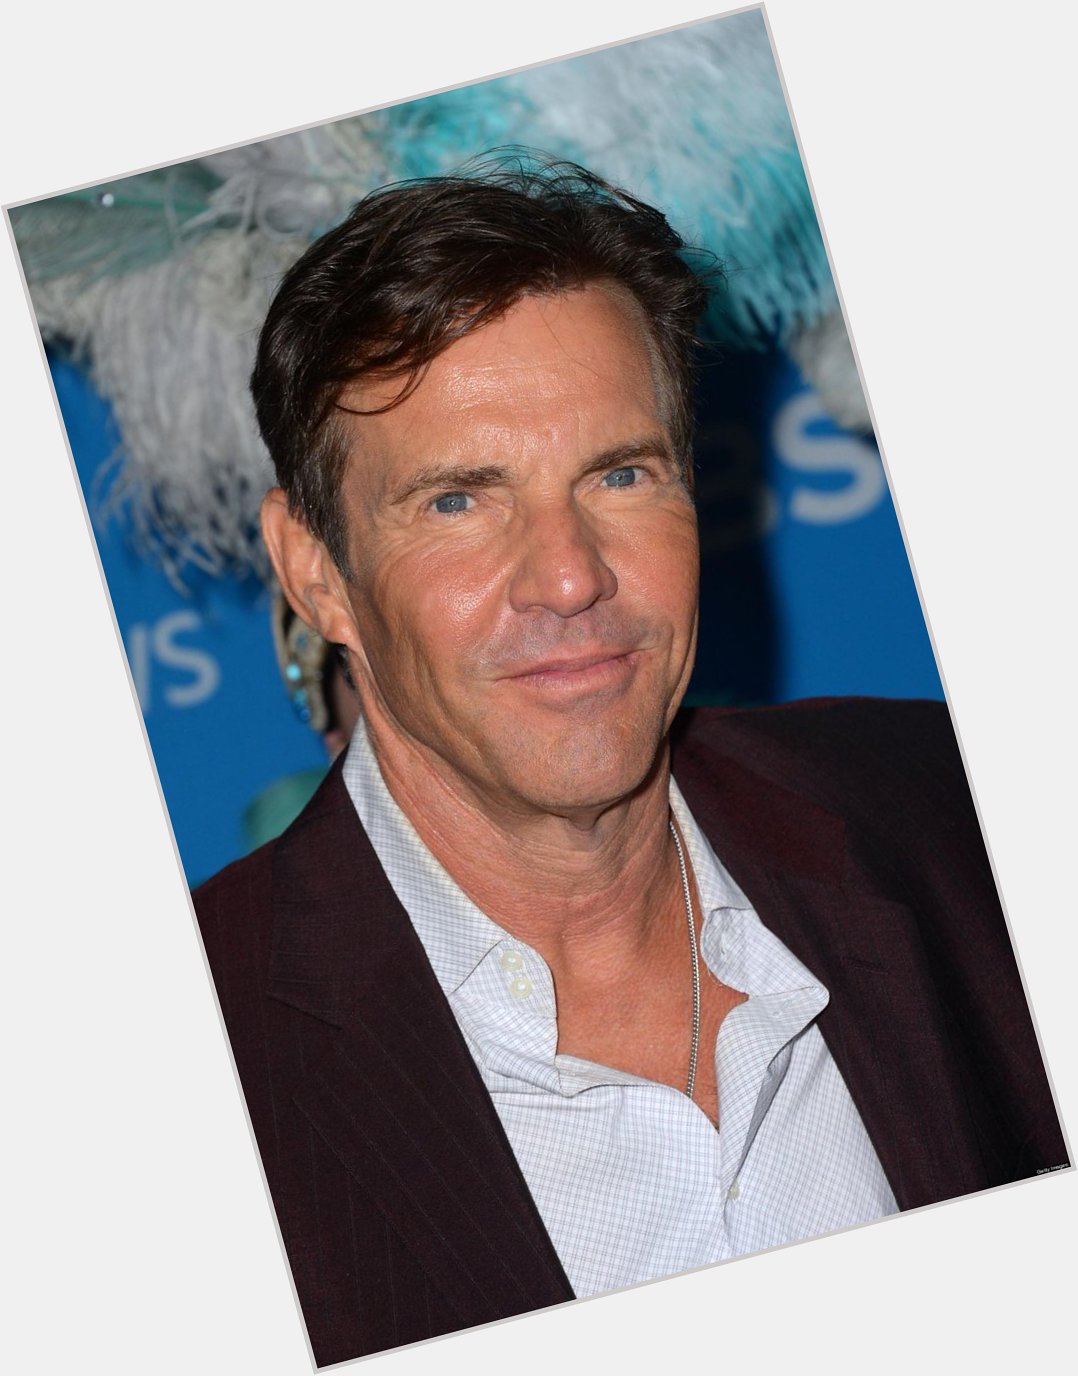 Happy 61st birthday to Houston native Dennis Quaid. Your favorite DQ movie? He was great in Wyatt Earp. 